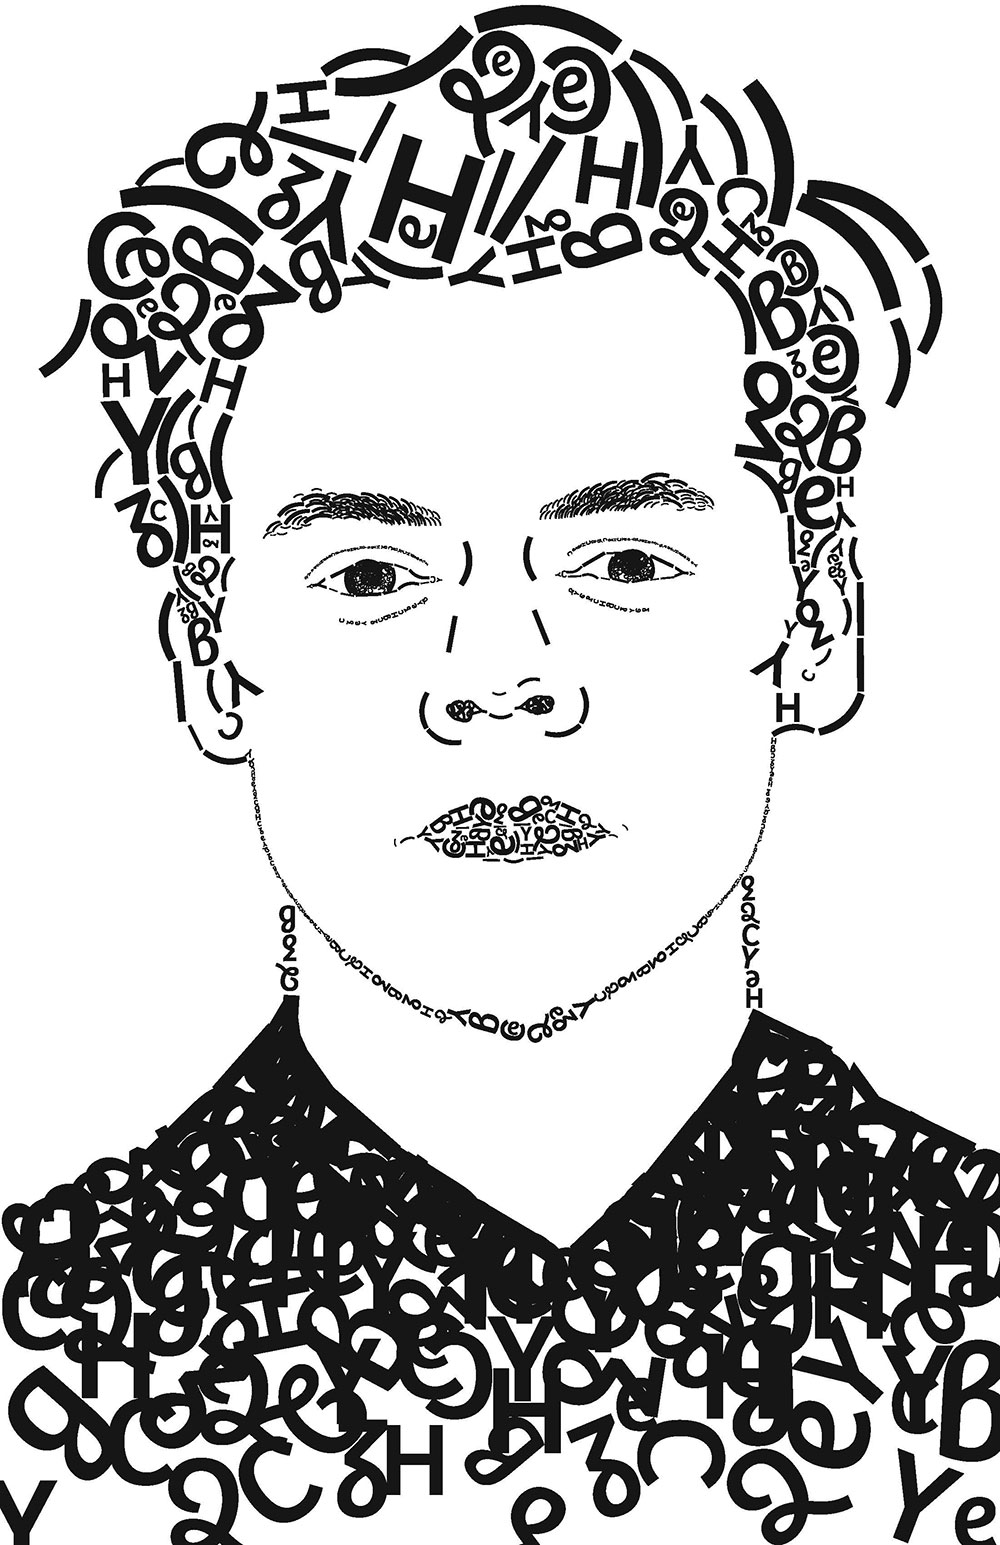 Several letters and symbols come together to create an image of Harry Styles.